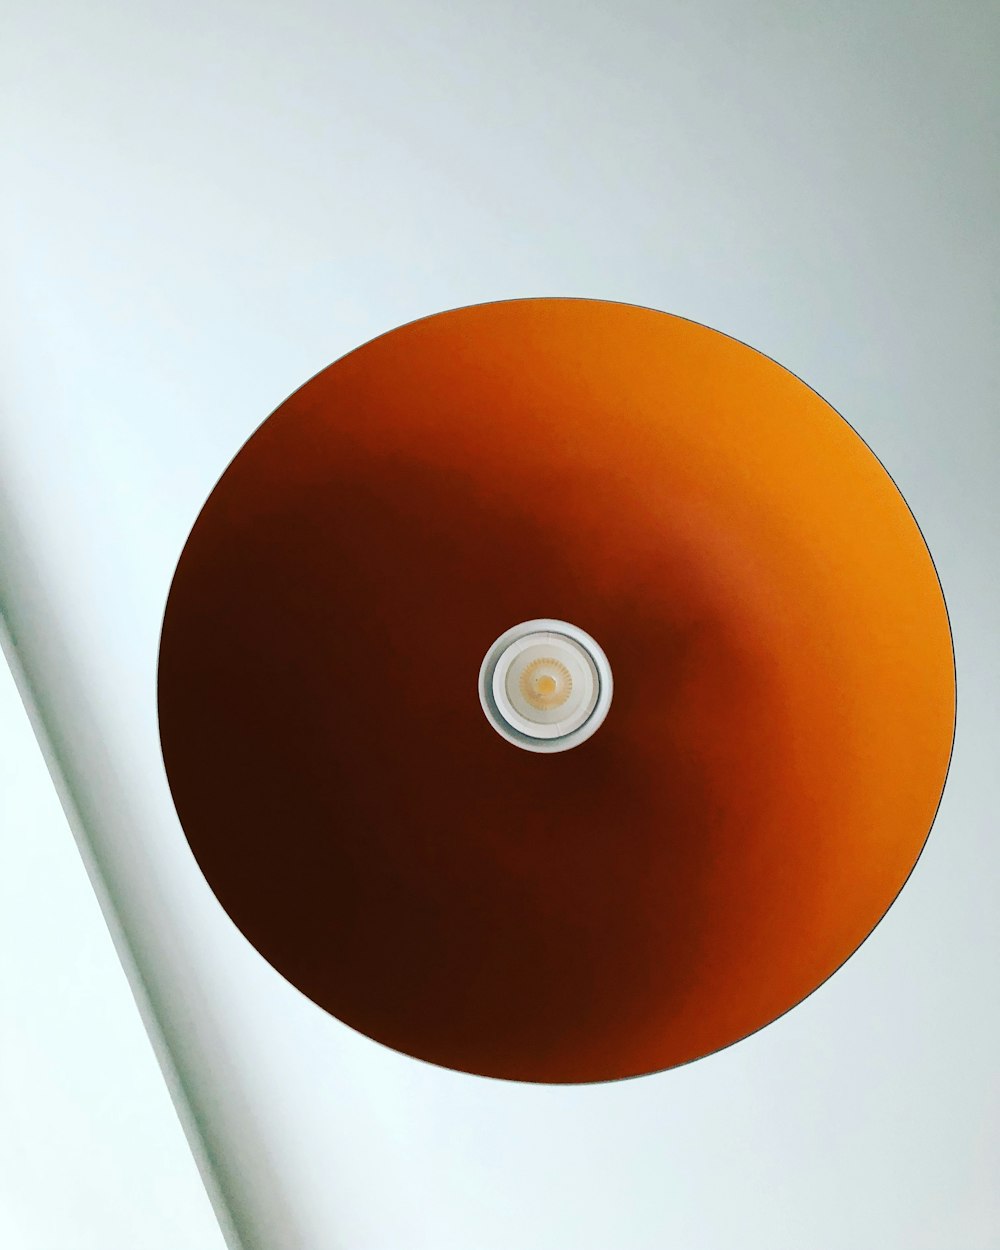 a round light fixture in a white room